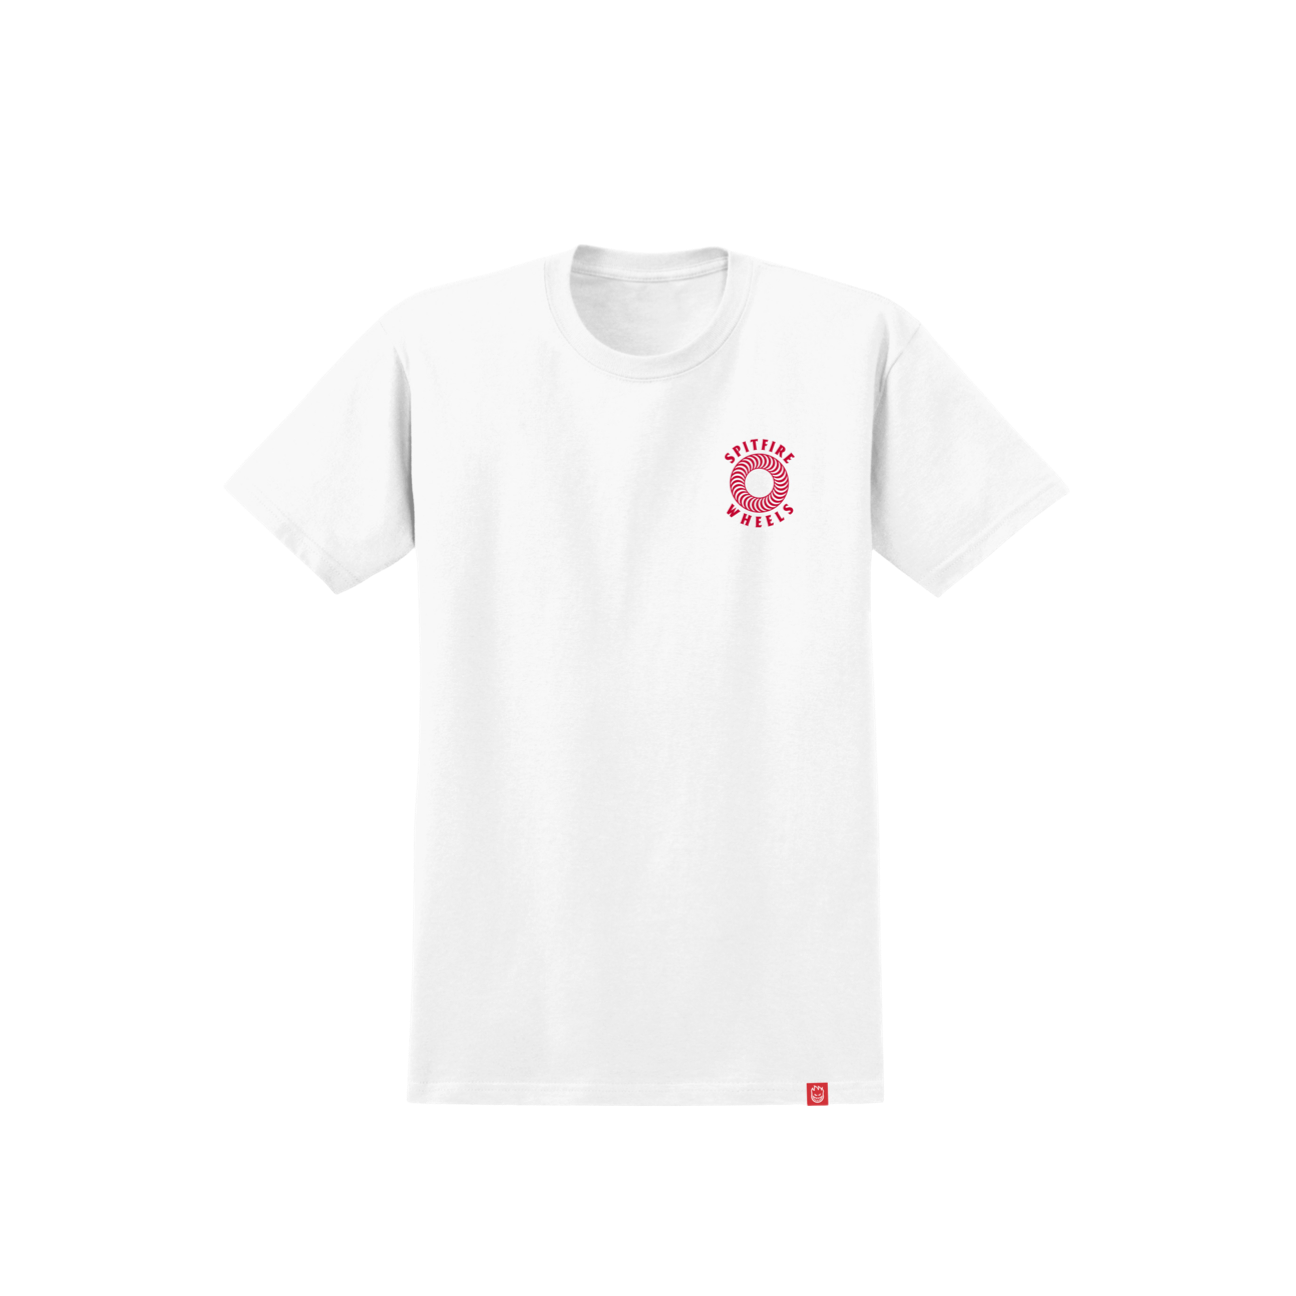 SPITFIRE - HOLLOW CLASSIC YOUTH TEE - WHITE/RED